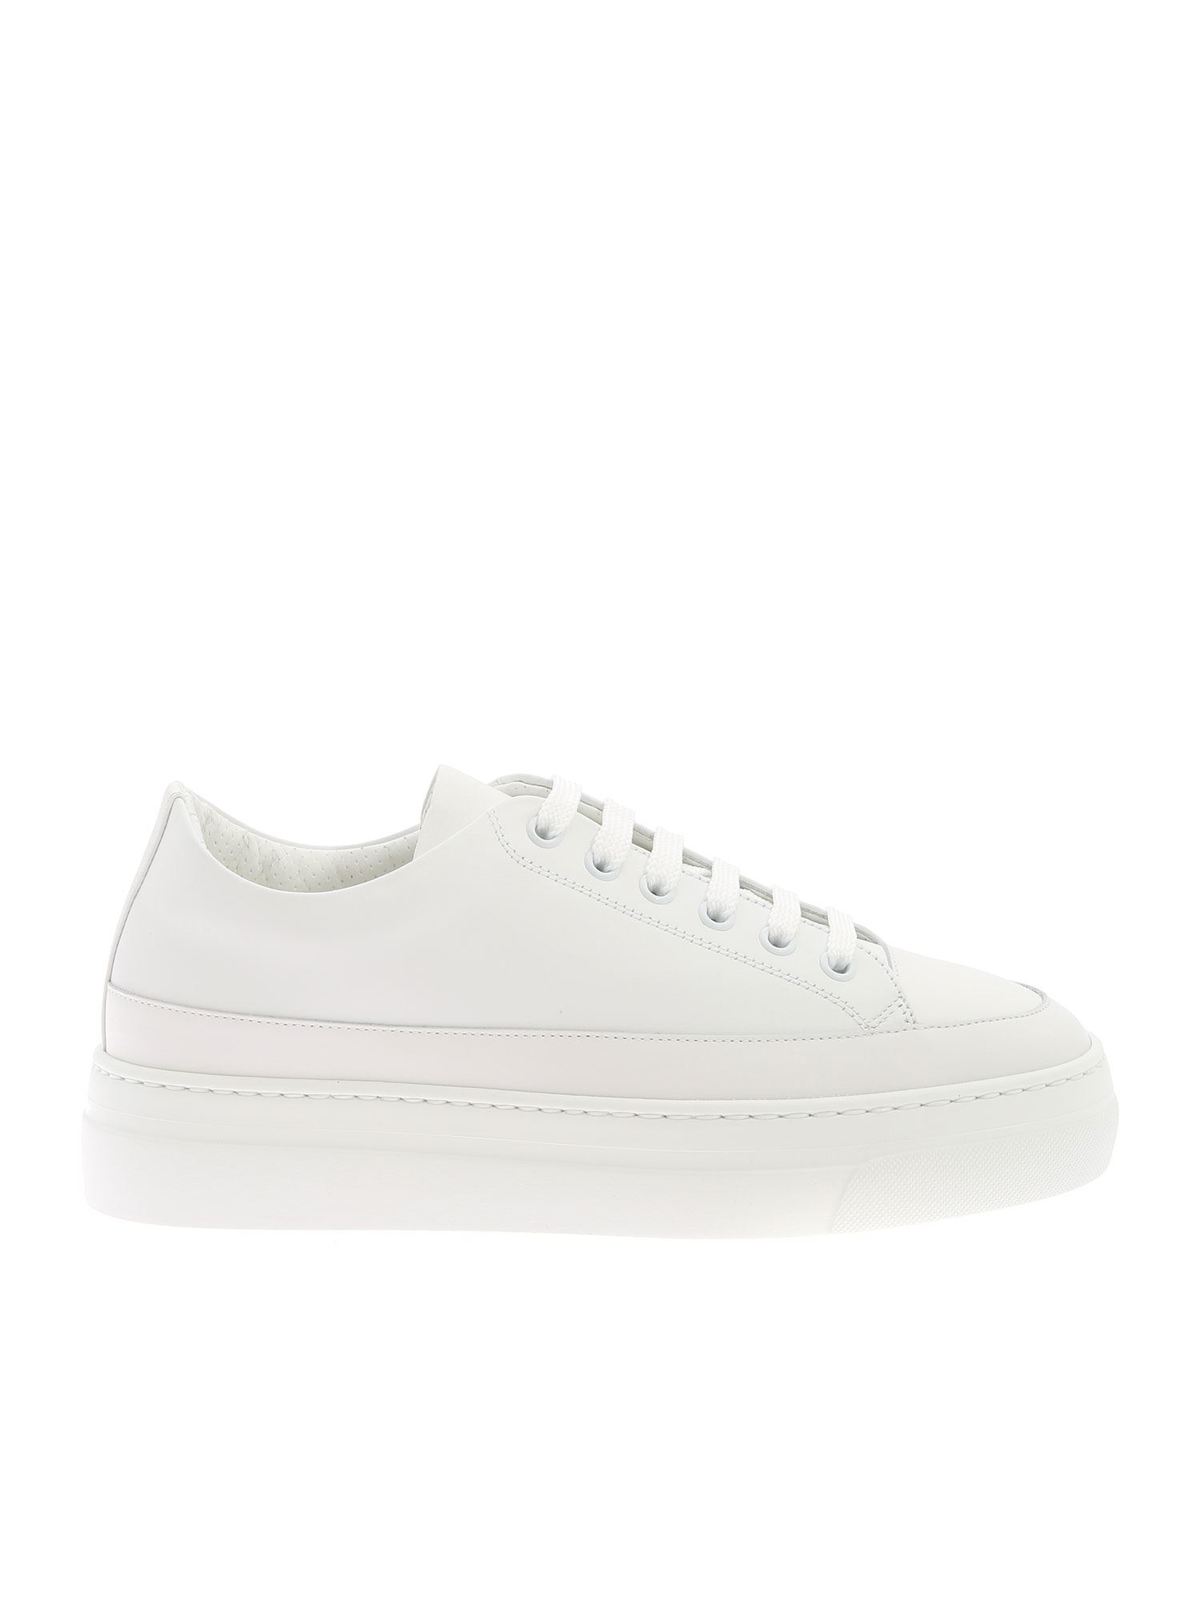 Doucal's WHITE SNEAKERS